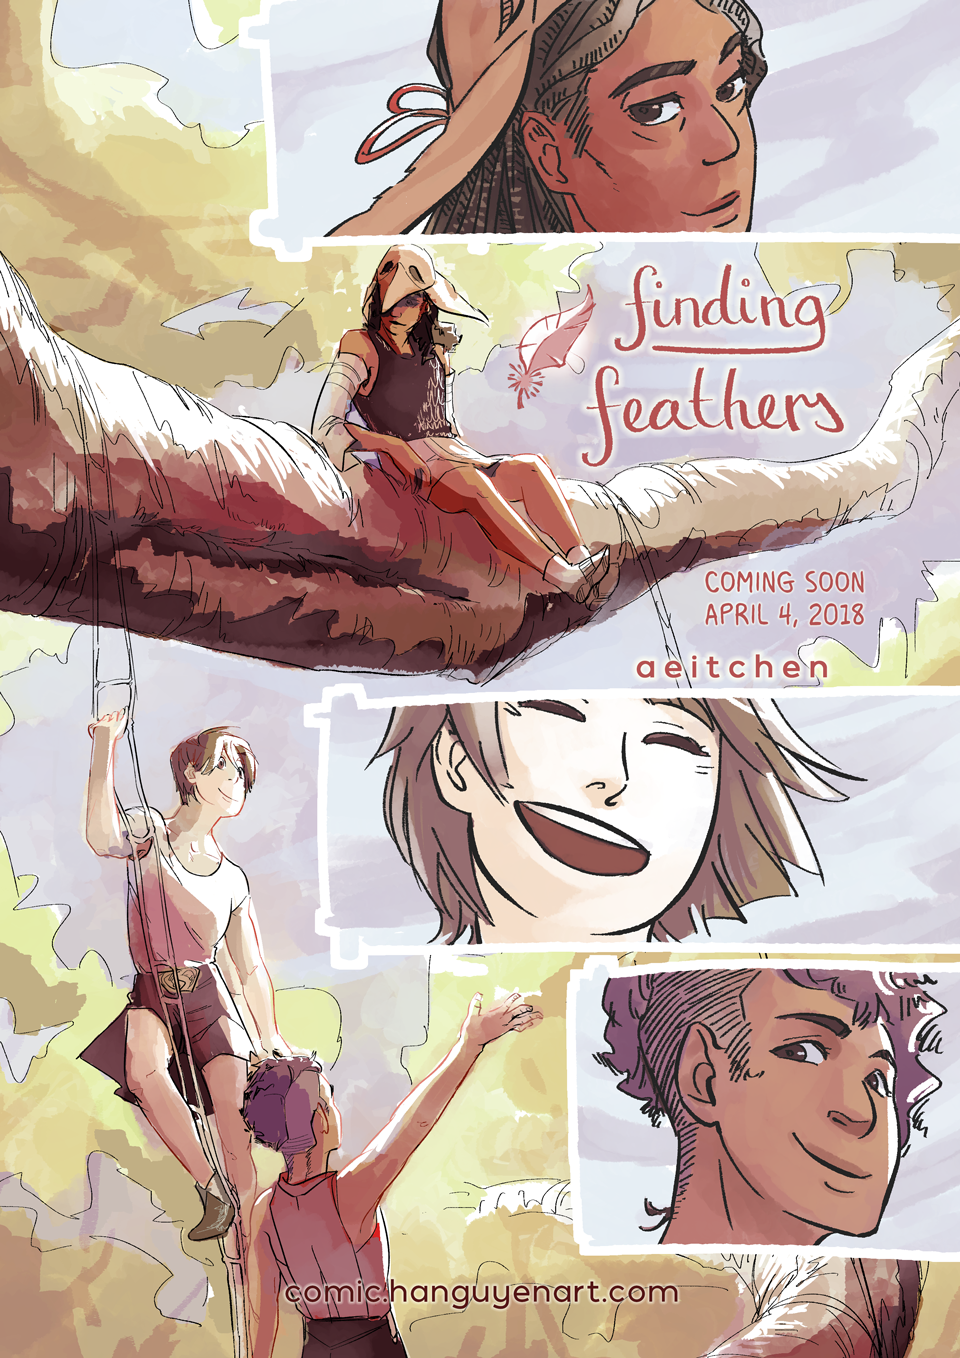 Finding Feathers webcomic will begin serialisation from April 4, 2018